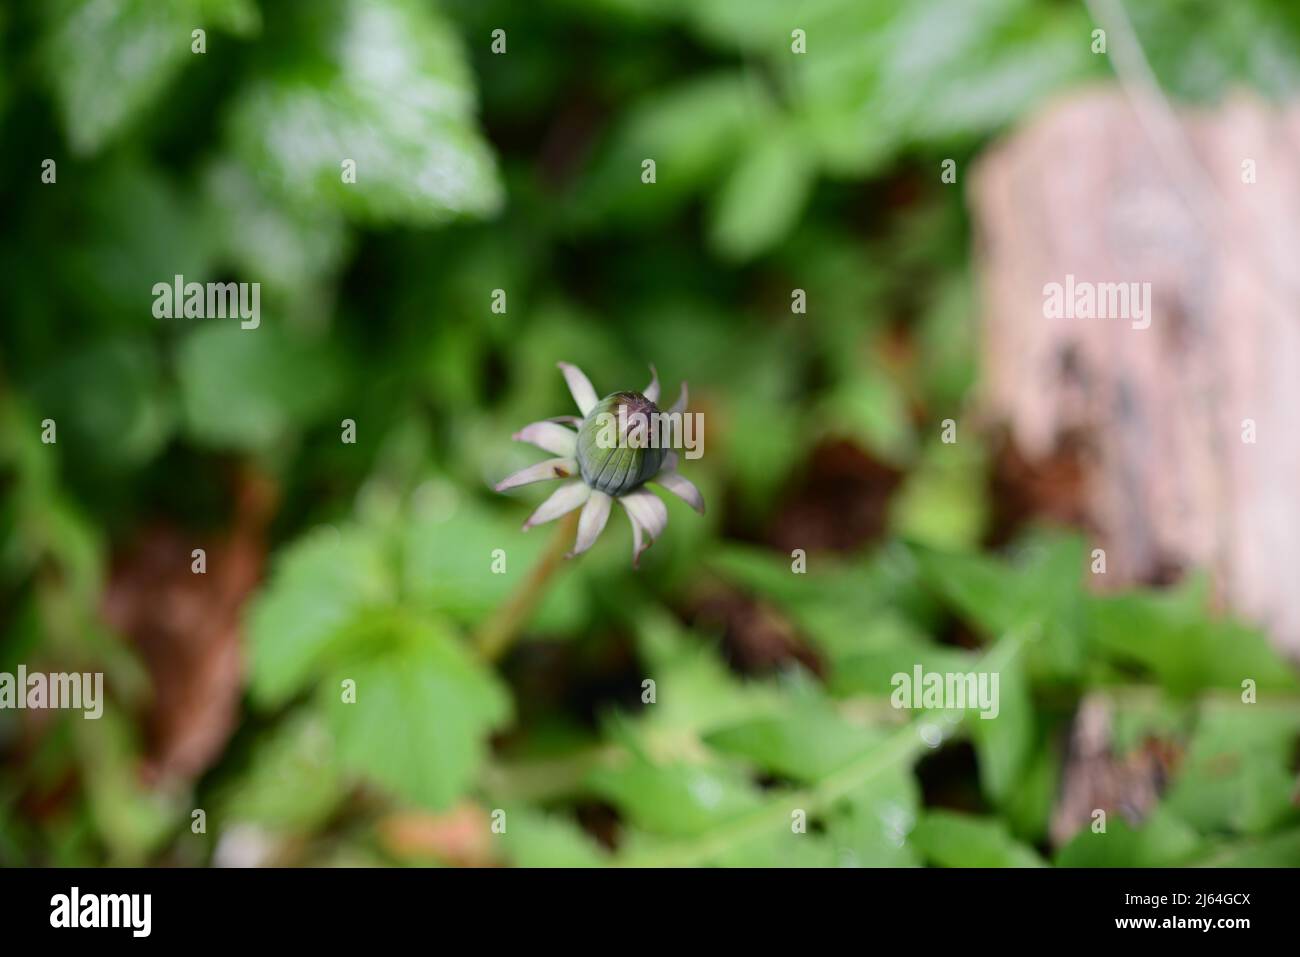 A closed green dandelion bud against green blurred leaves Stock Photo